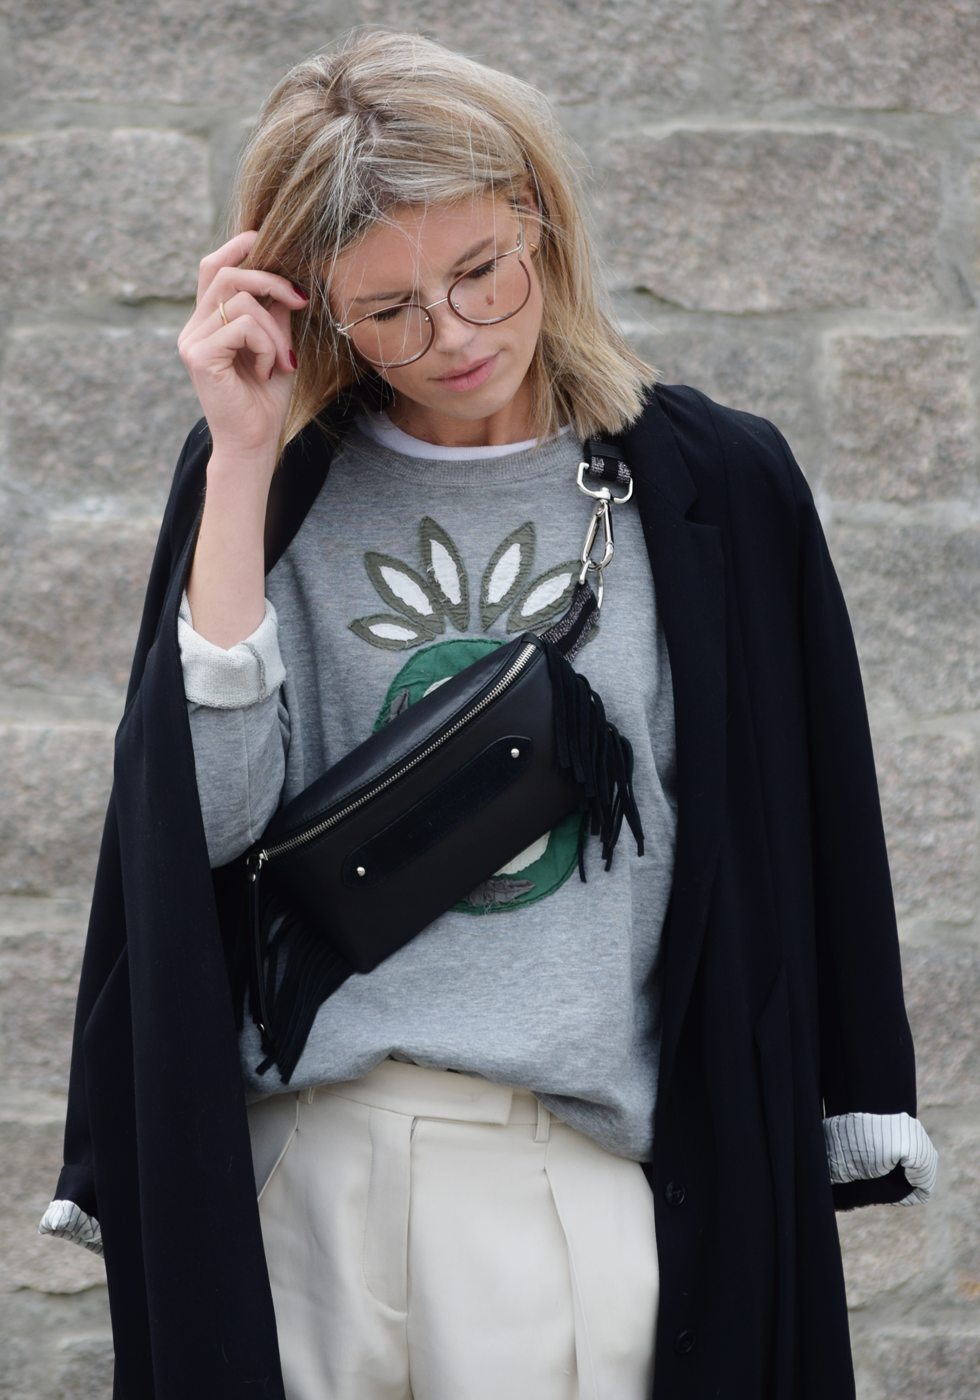 Outfit of the day, Chloé, Dewolf, Adidas, Sooco, Gerard Darel, IKKS, Vanessa Bruno, Marie Martens, ootd, style, fashion, blogger